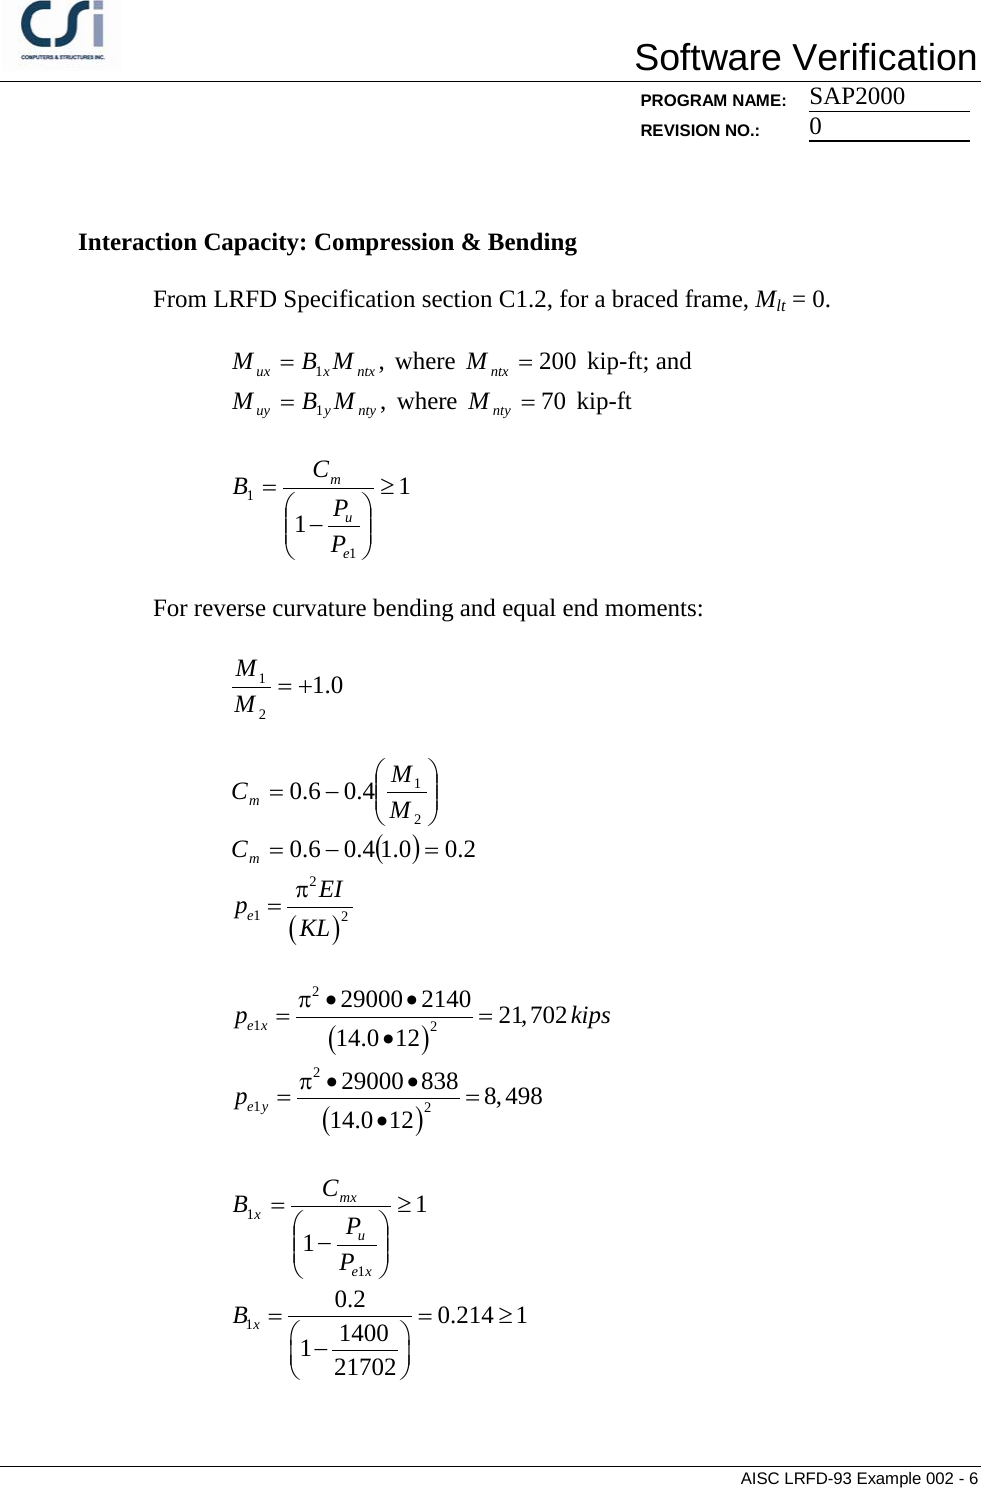 Page 6 of 7 - Contents AISC LRFD-93 Example 002